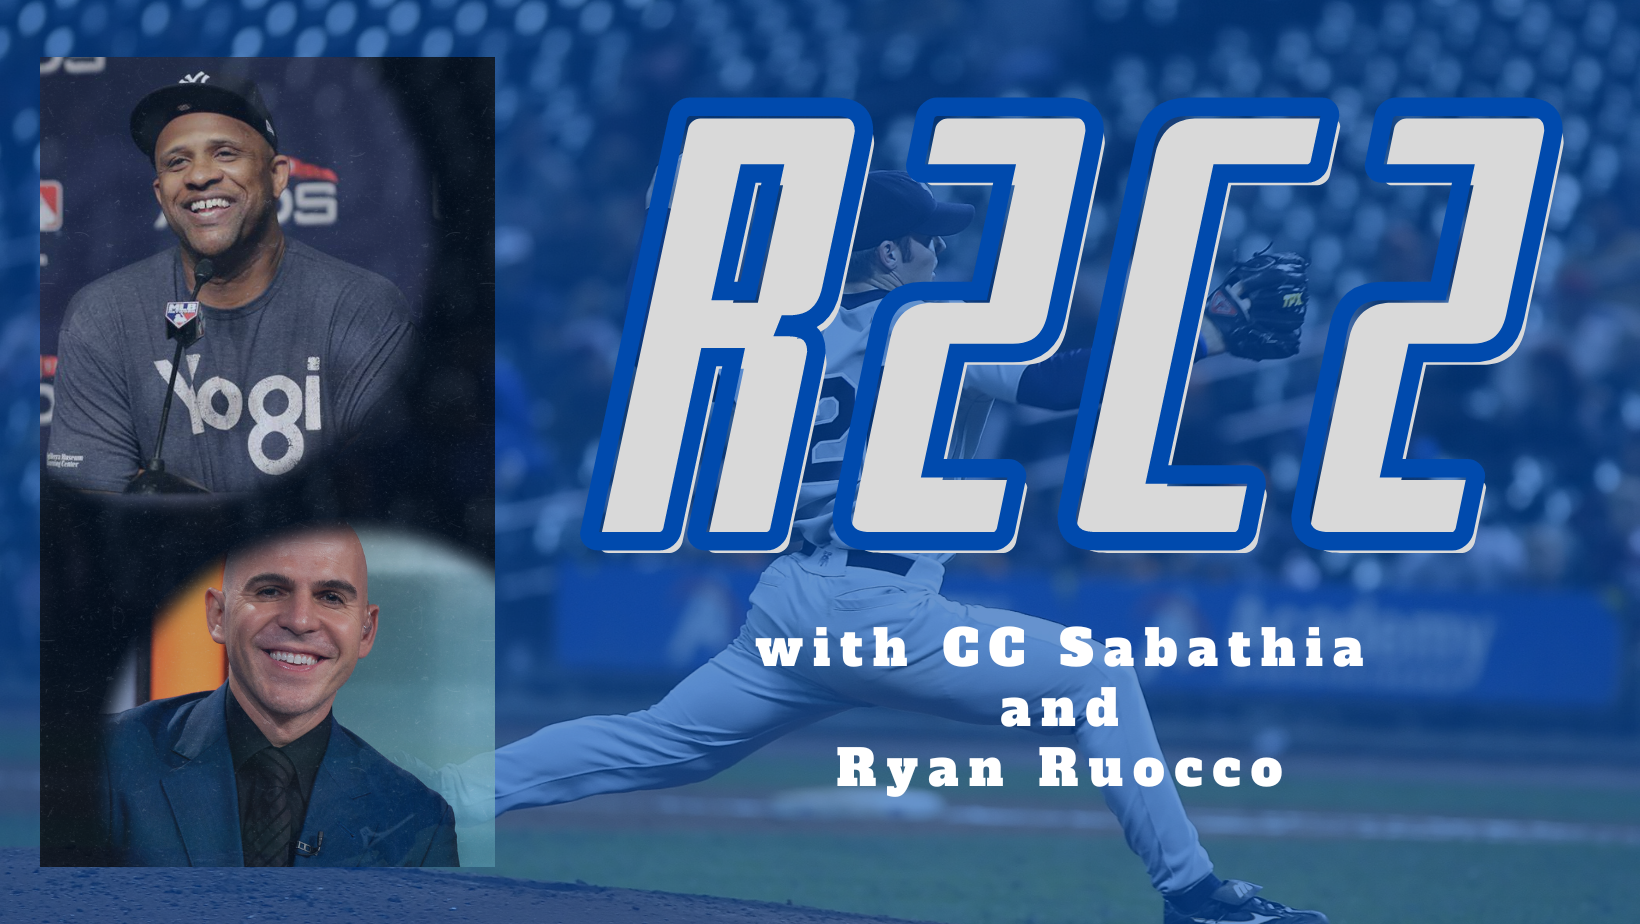 R2C2 Podcast Review